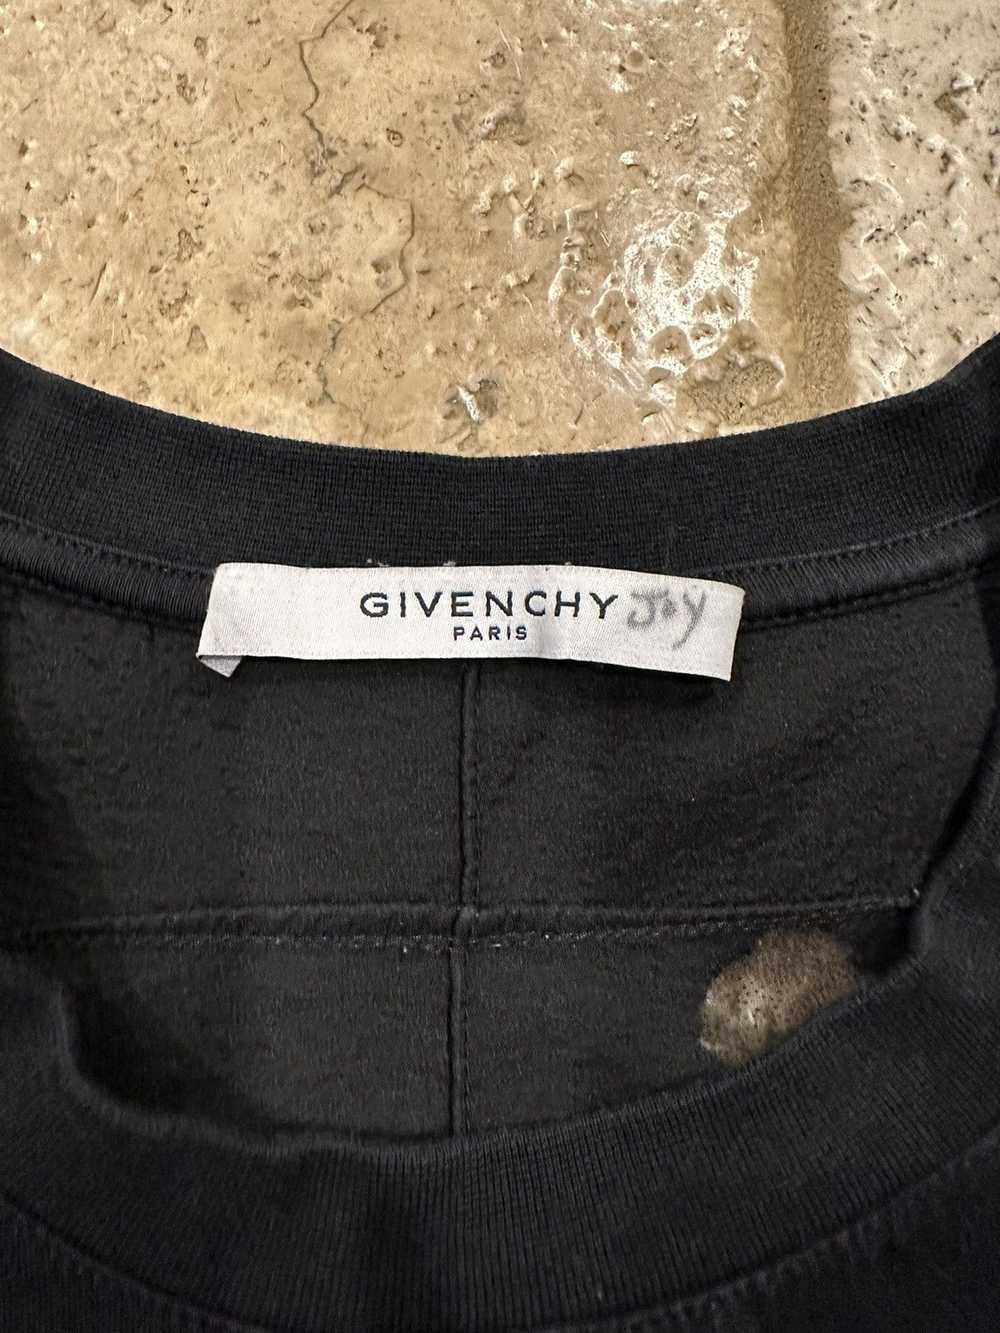 Givenchy Givenchy Destroyed / Distressed Black Pa… - image 6